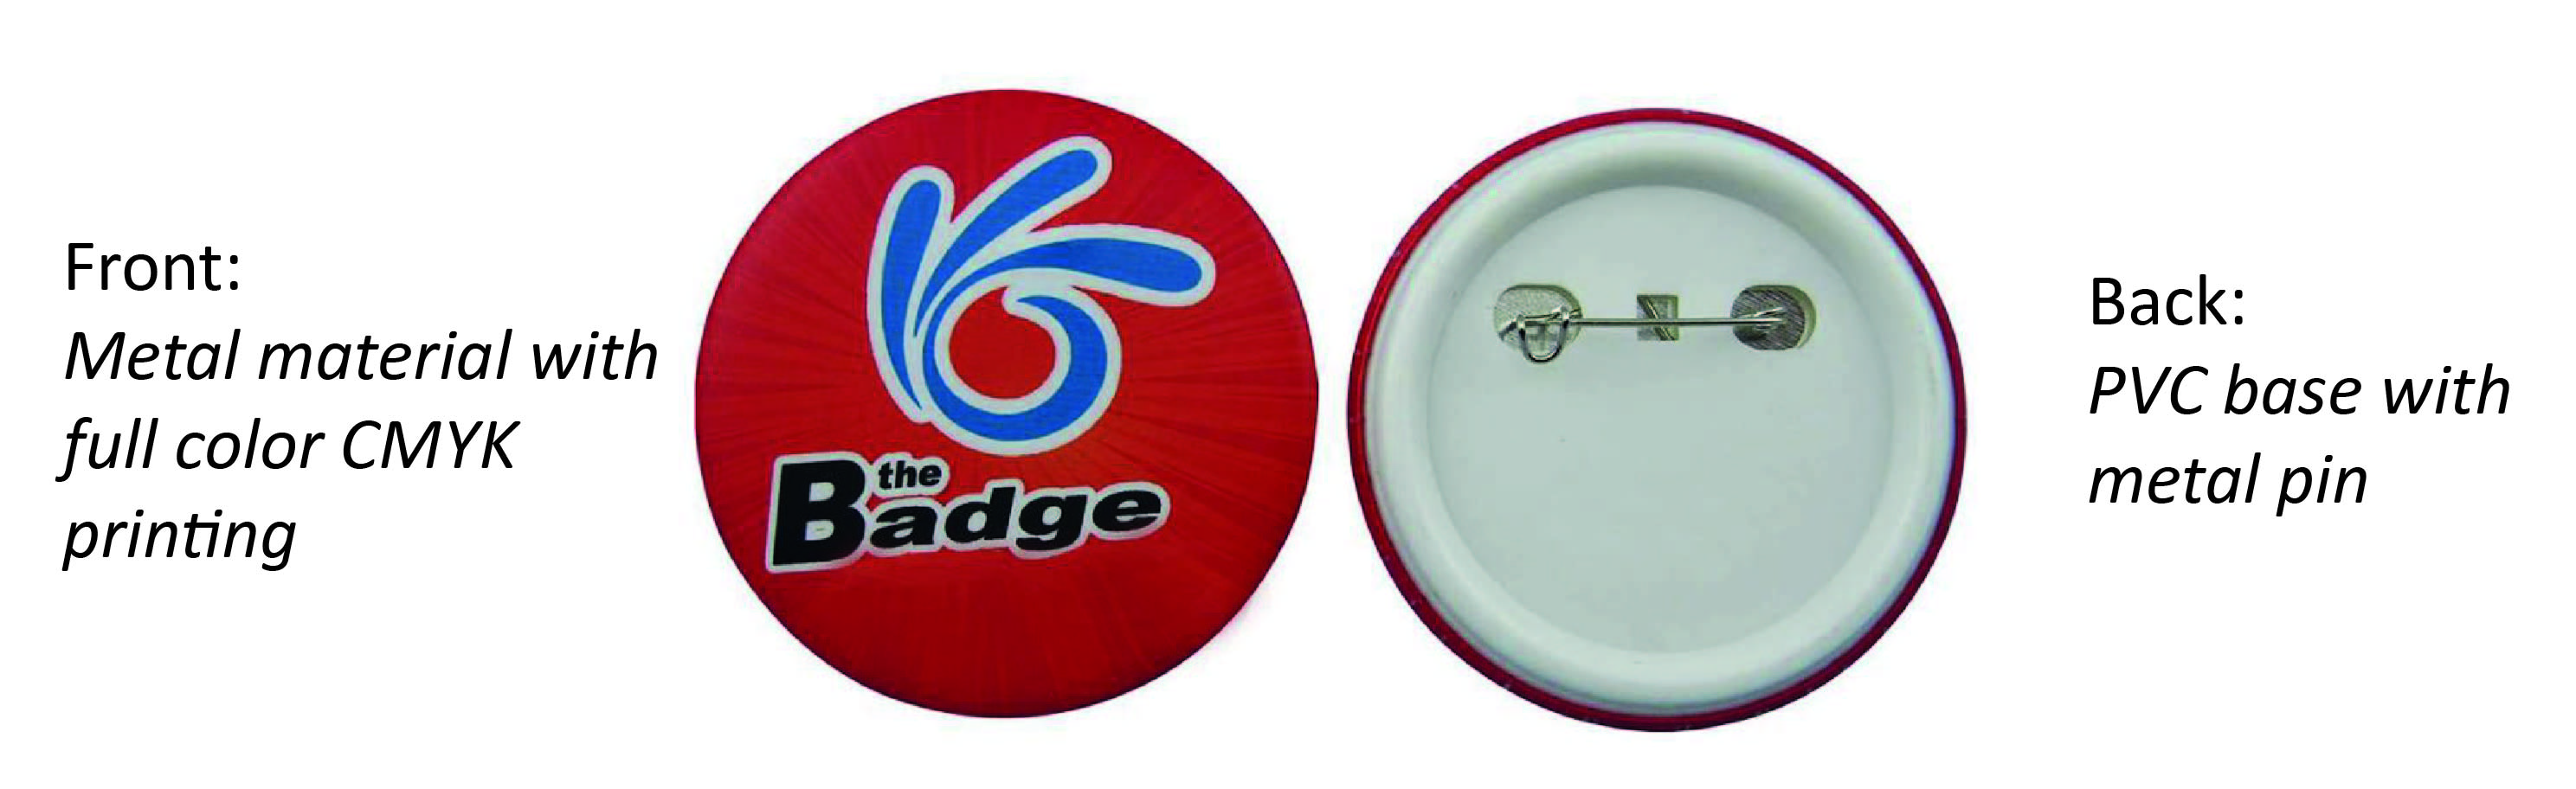 button_badges_printing